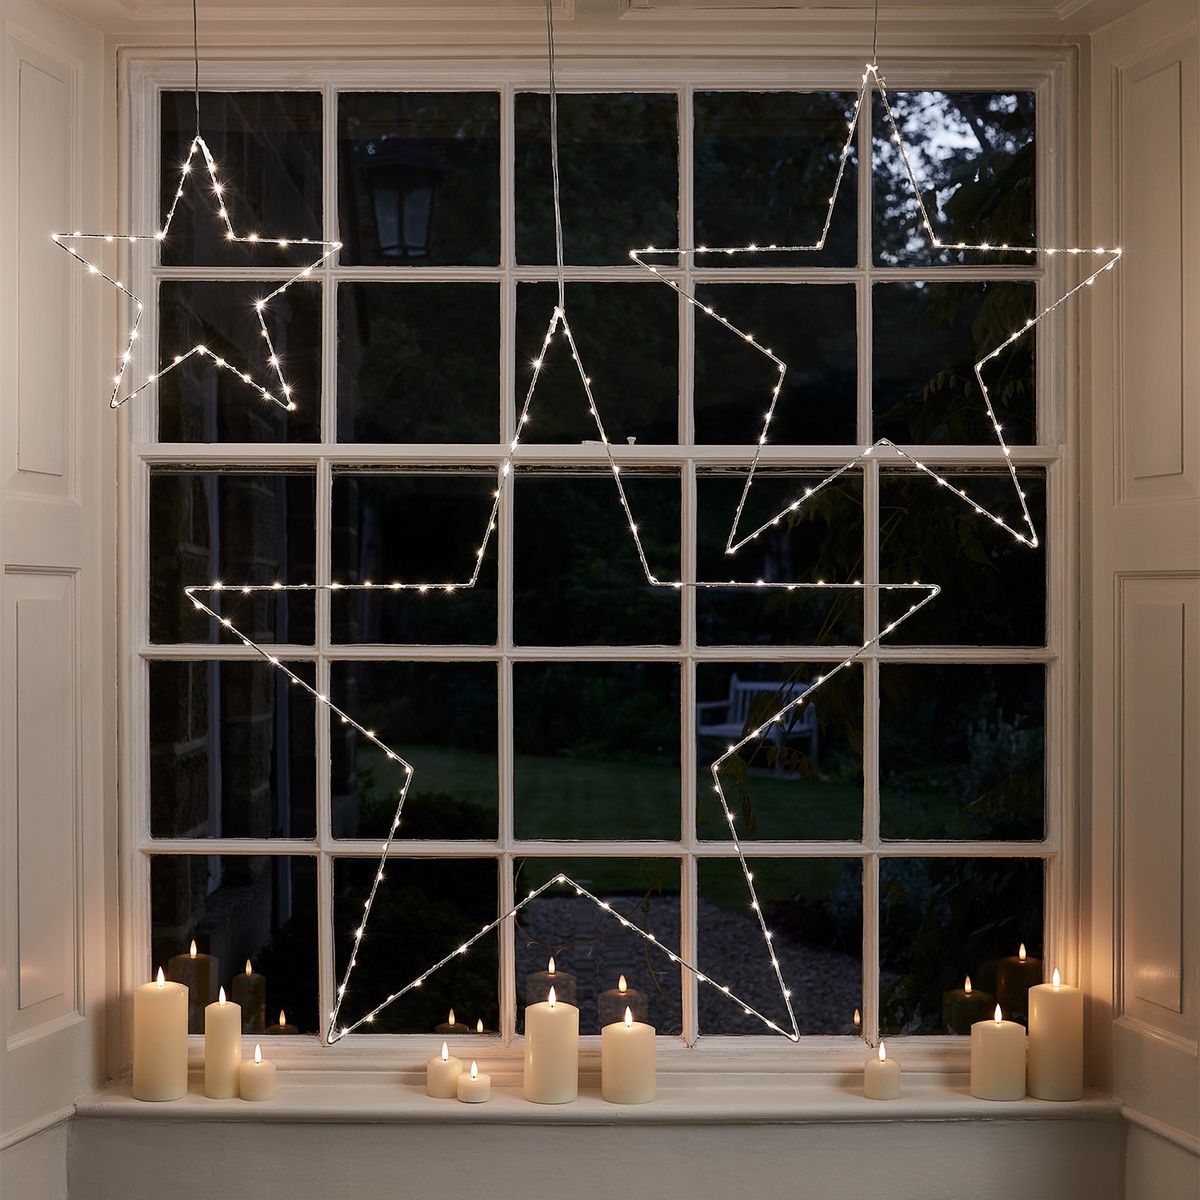 Christmas Window Decorations: Decorating Your Window At Christmas